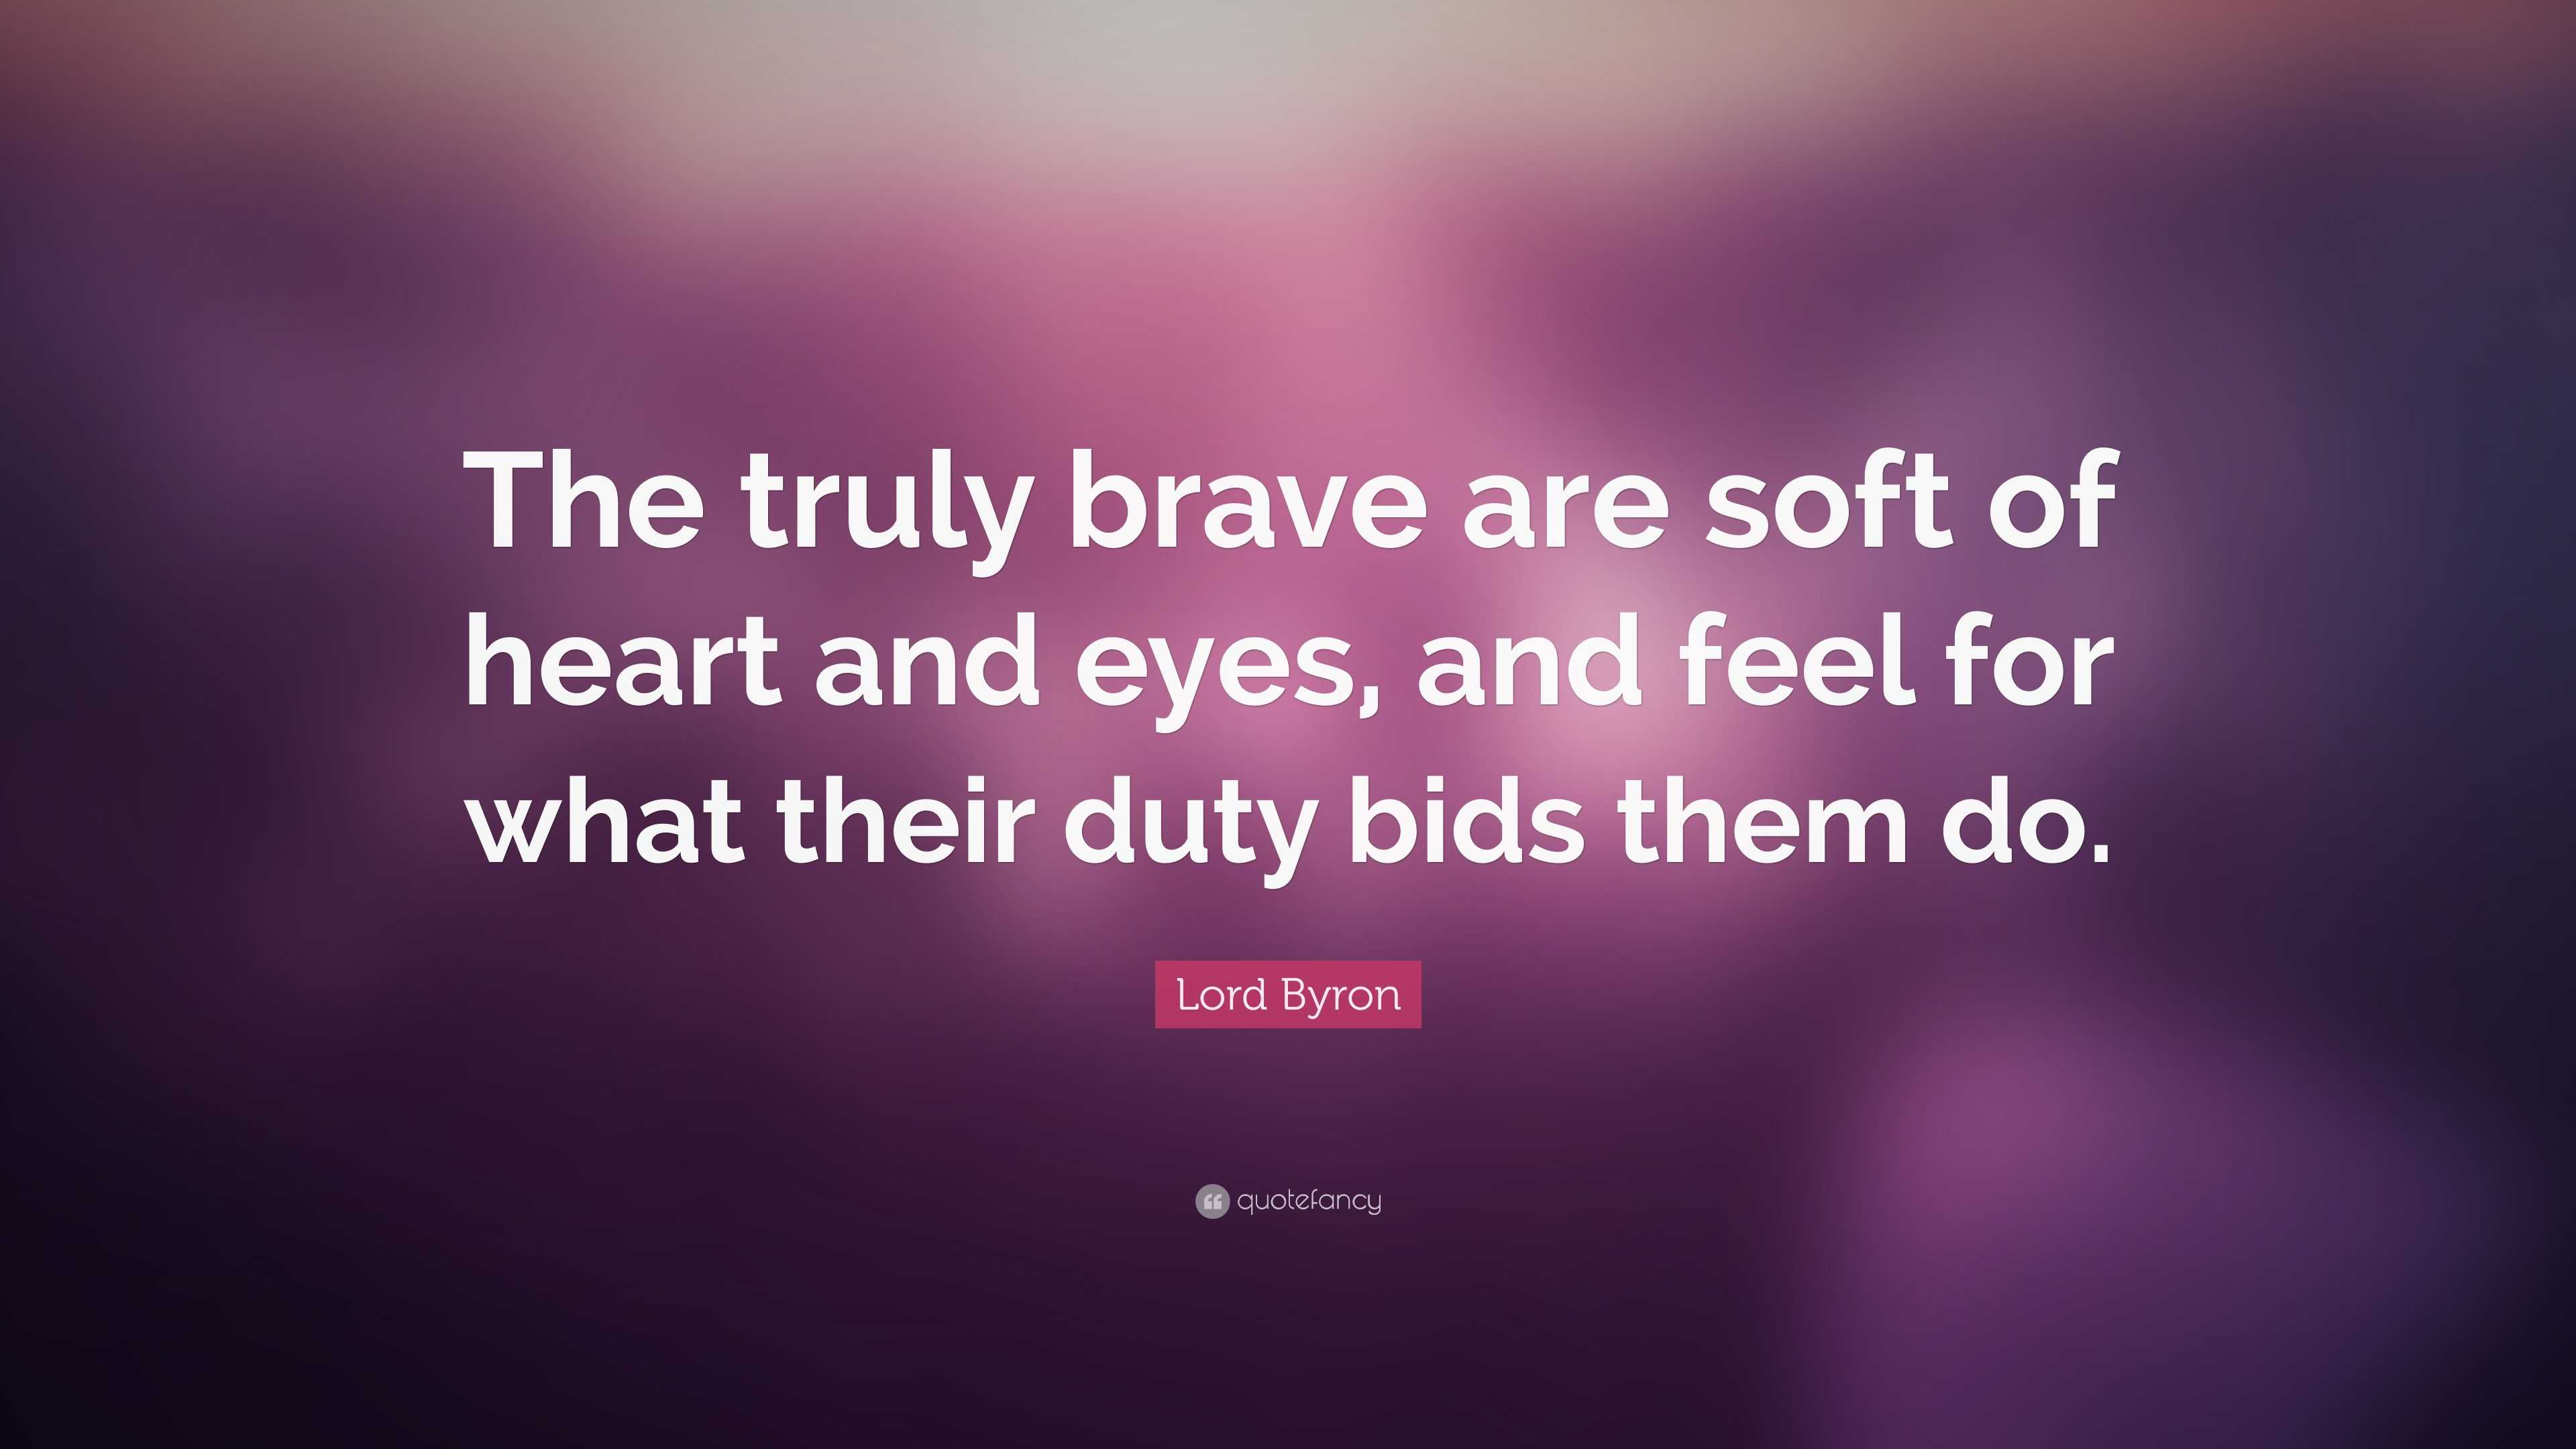 Lord Byron Quote: “The truly brave are soft of heart and eyes, and feel ...